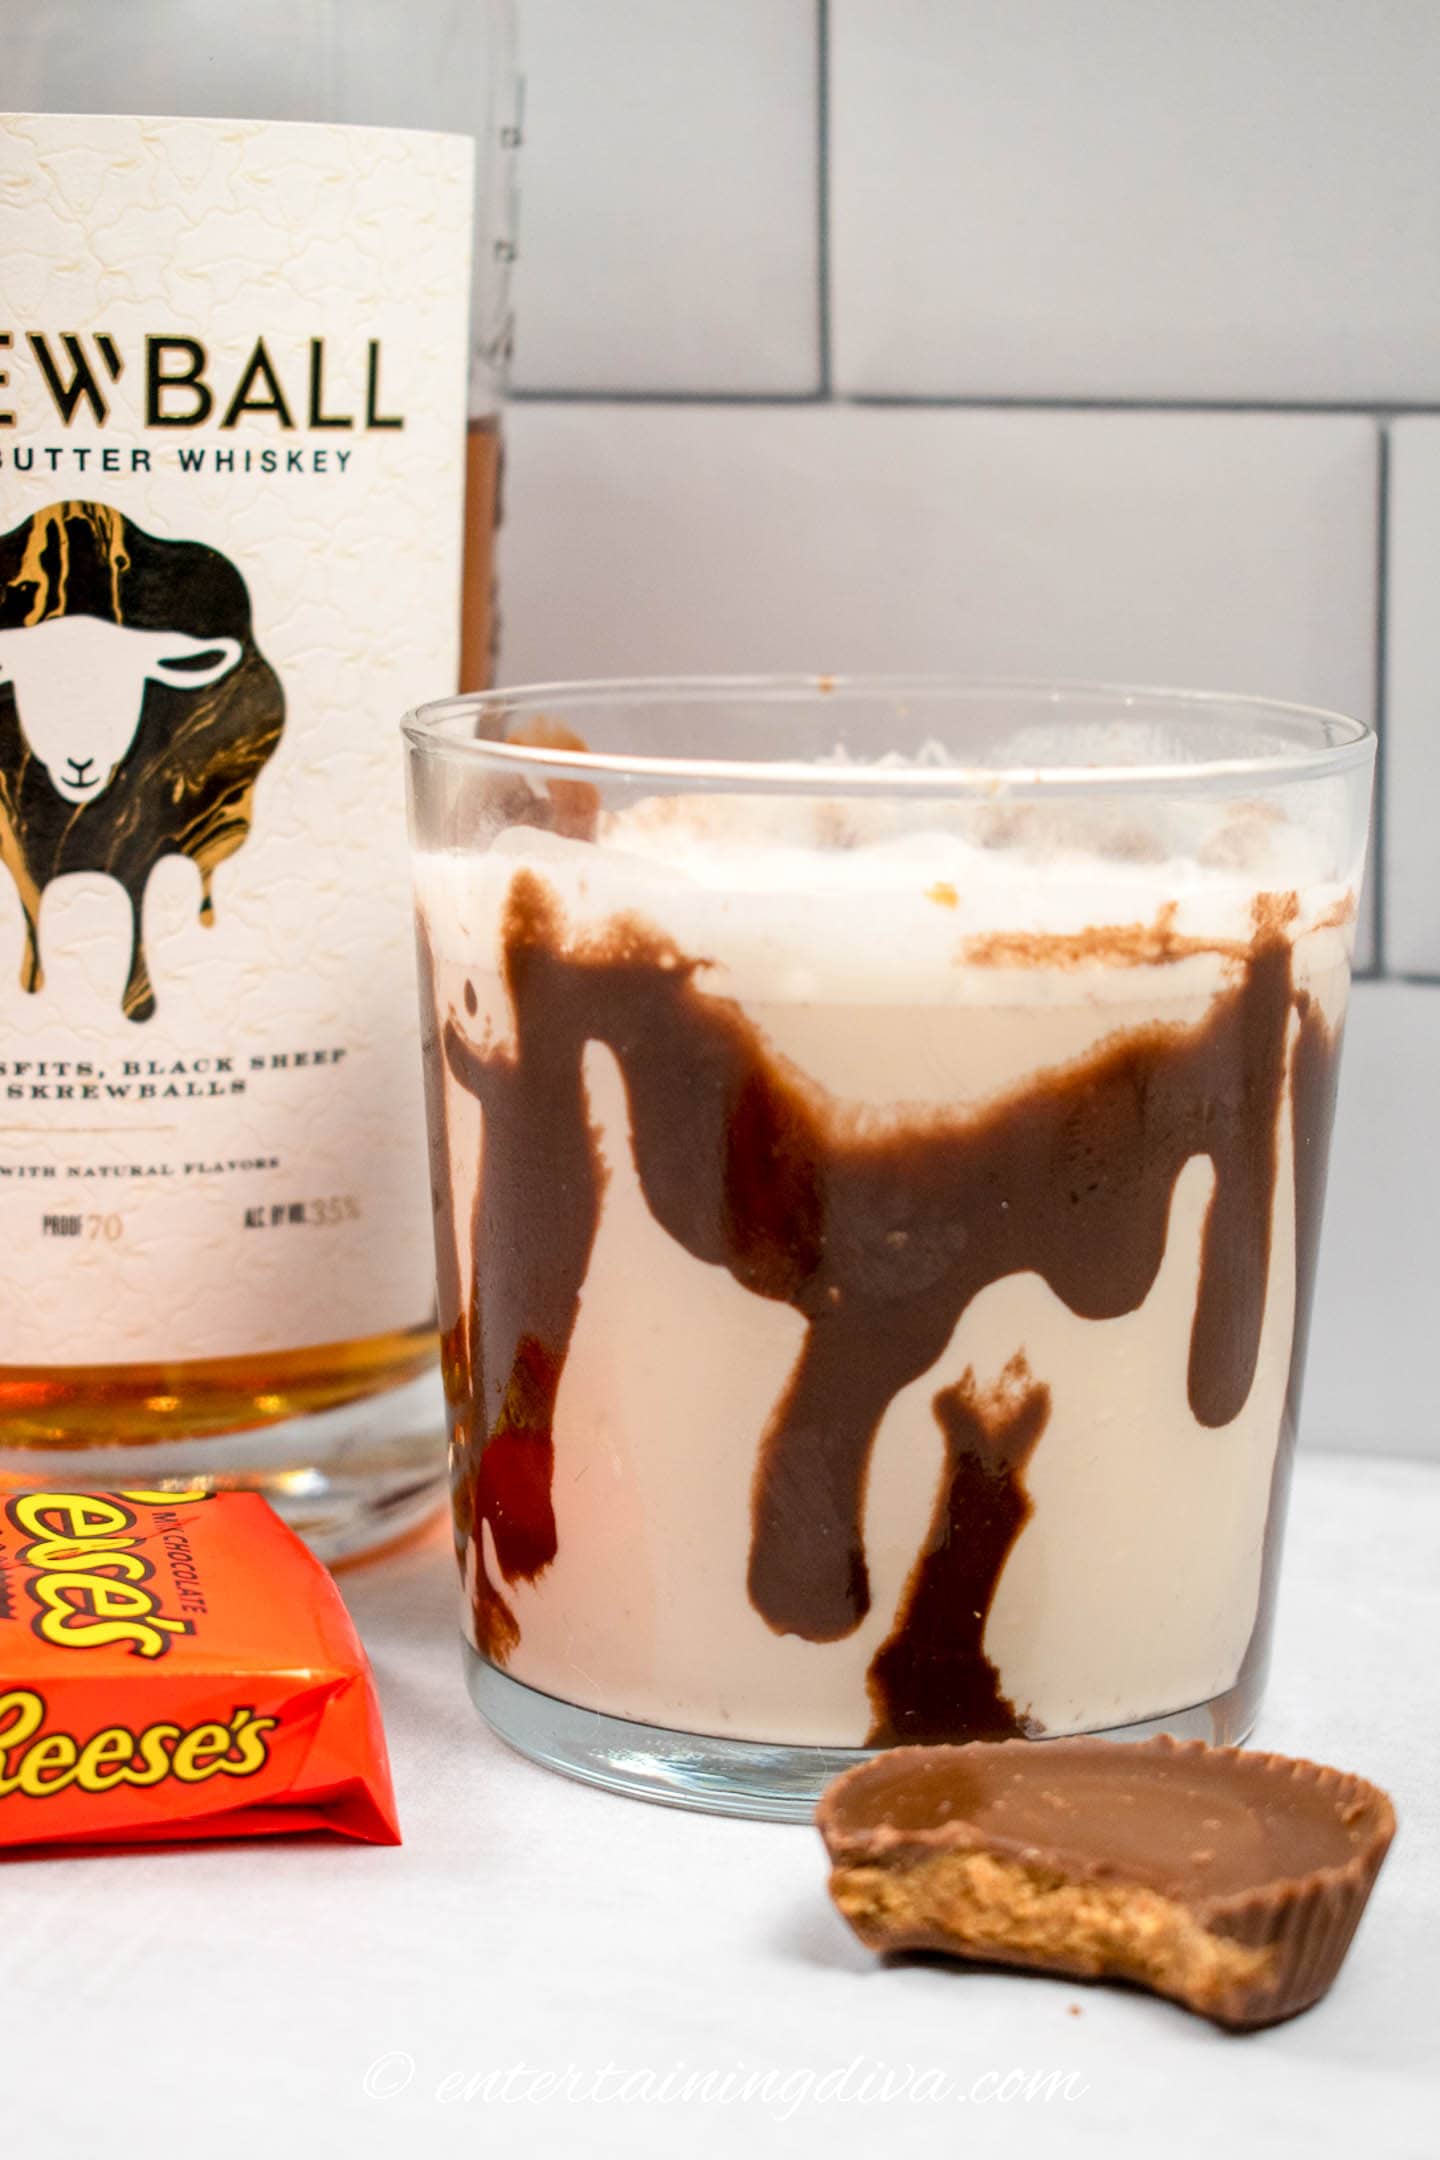 peanut butter whisky cocktail in a rocks glass drizzled with chocolate, beside a bottle of skrewball whiskey and a Reese's peanut butter cup